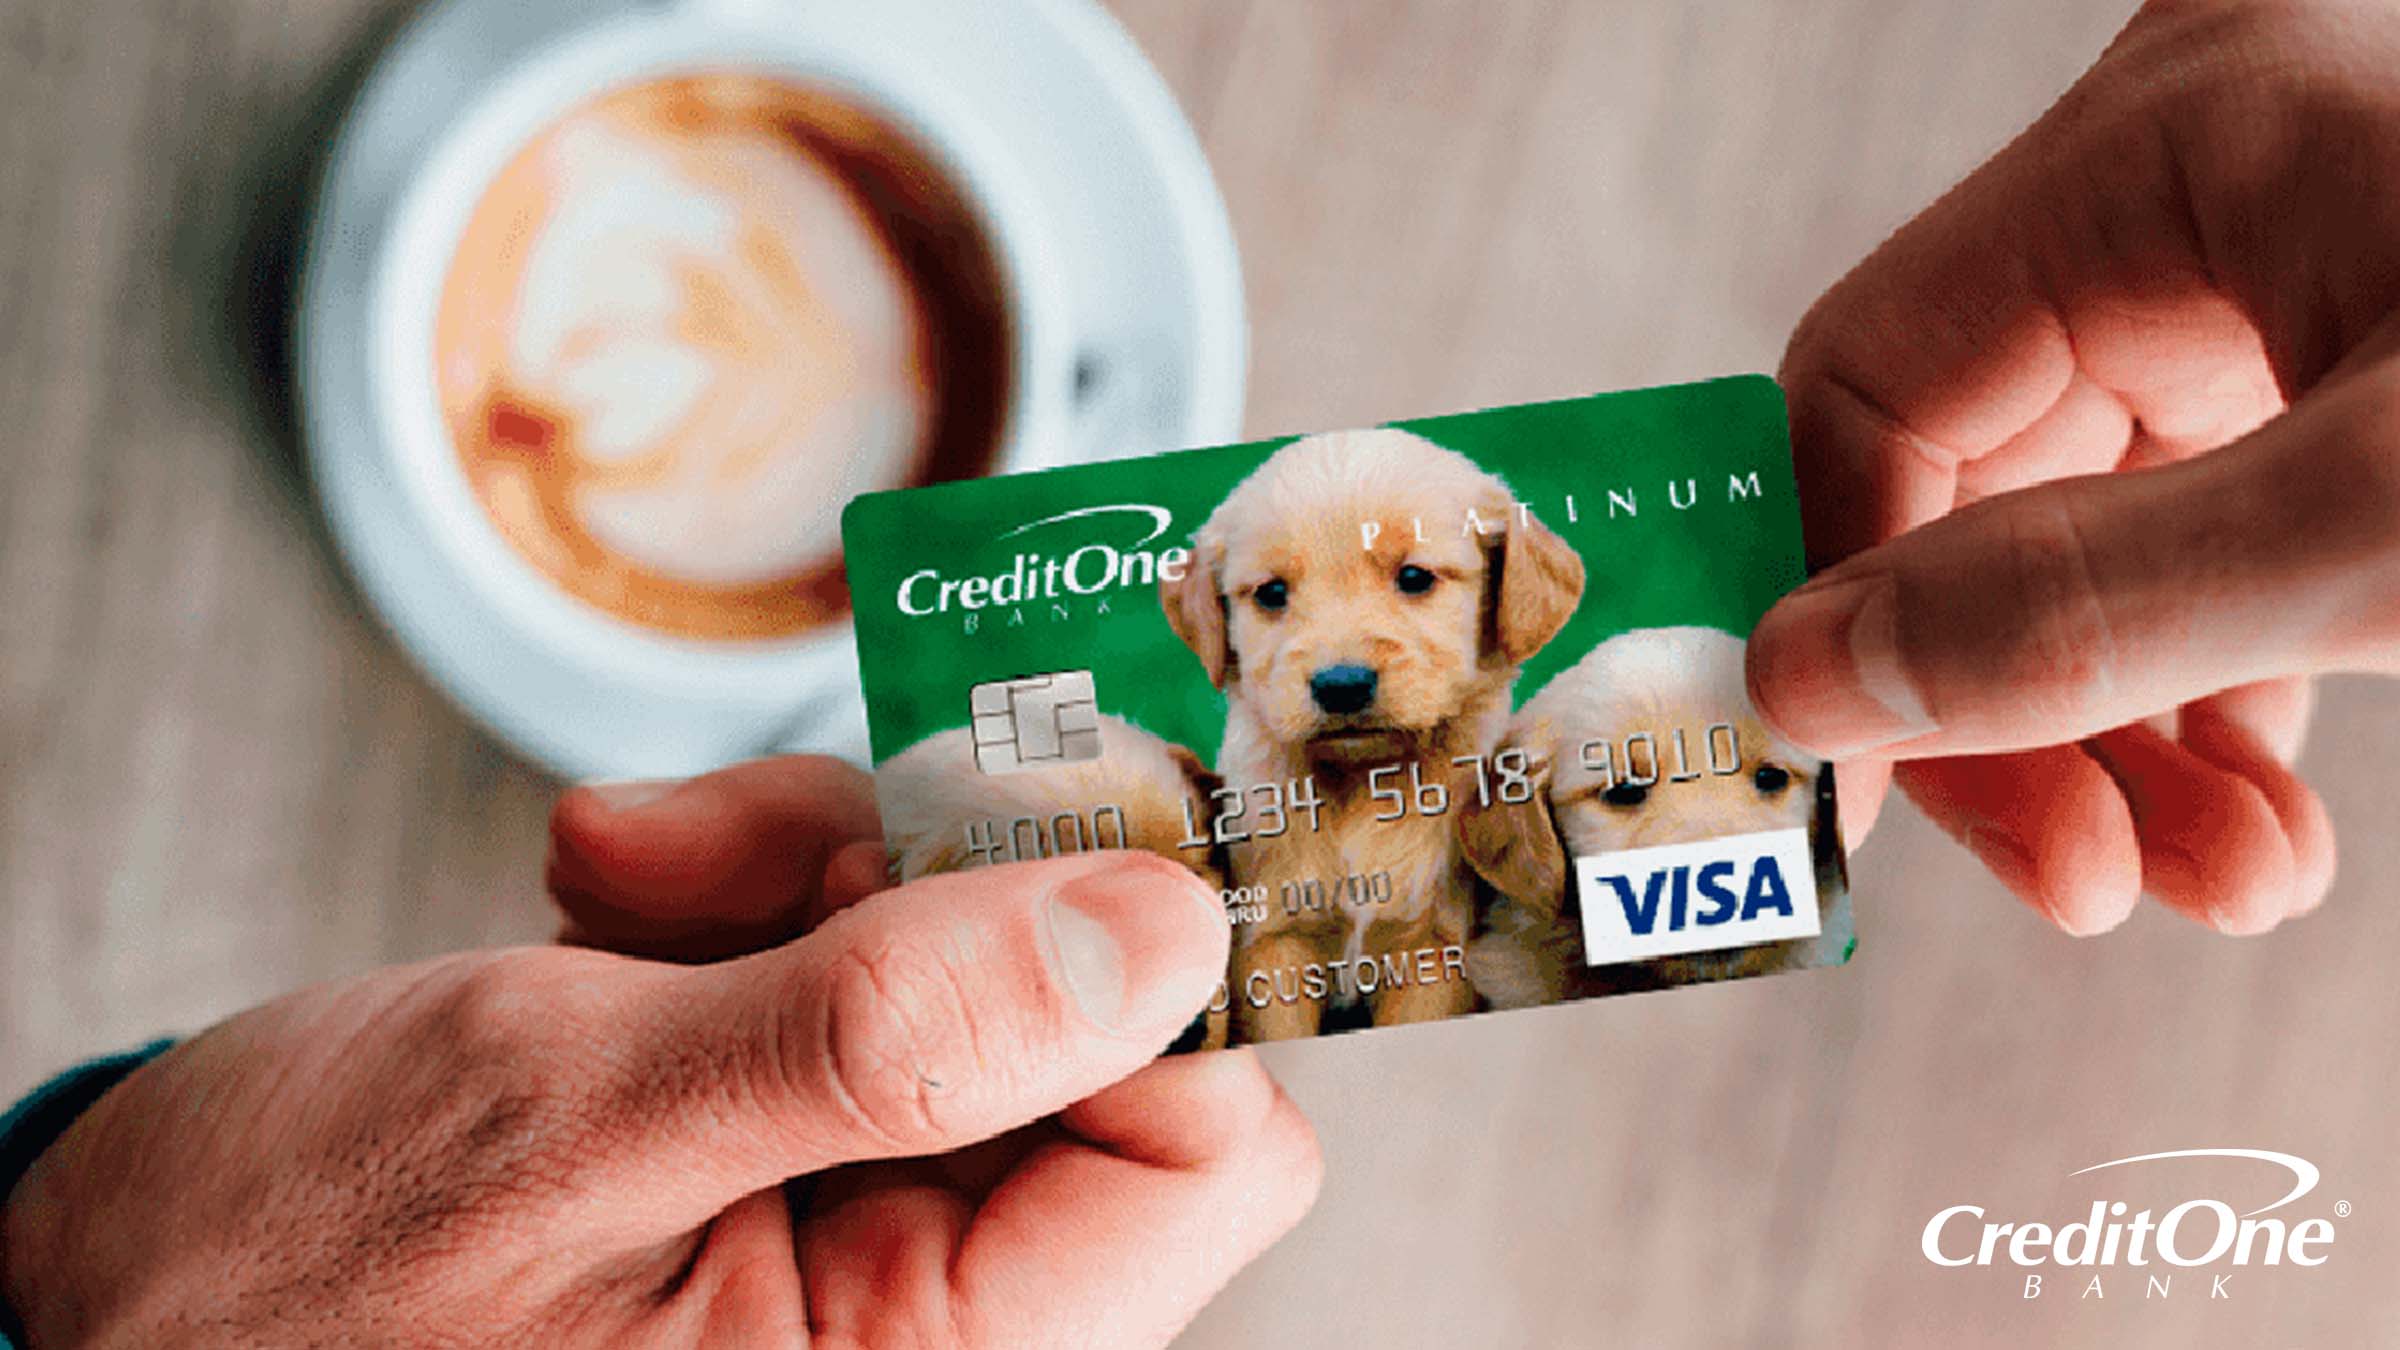 A payment transaction for a cup of coffee using a Credit One Bank credit card